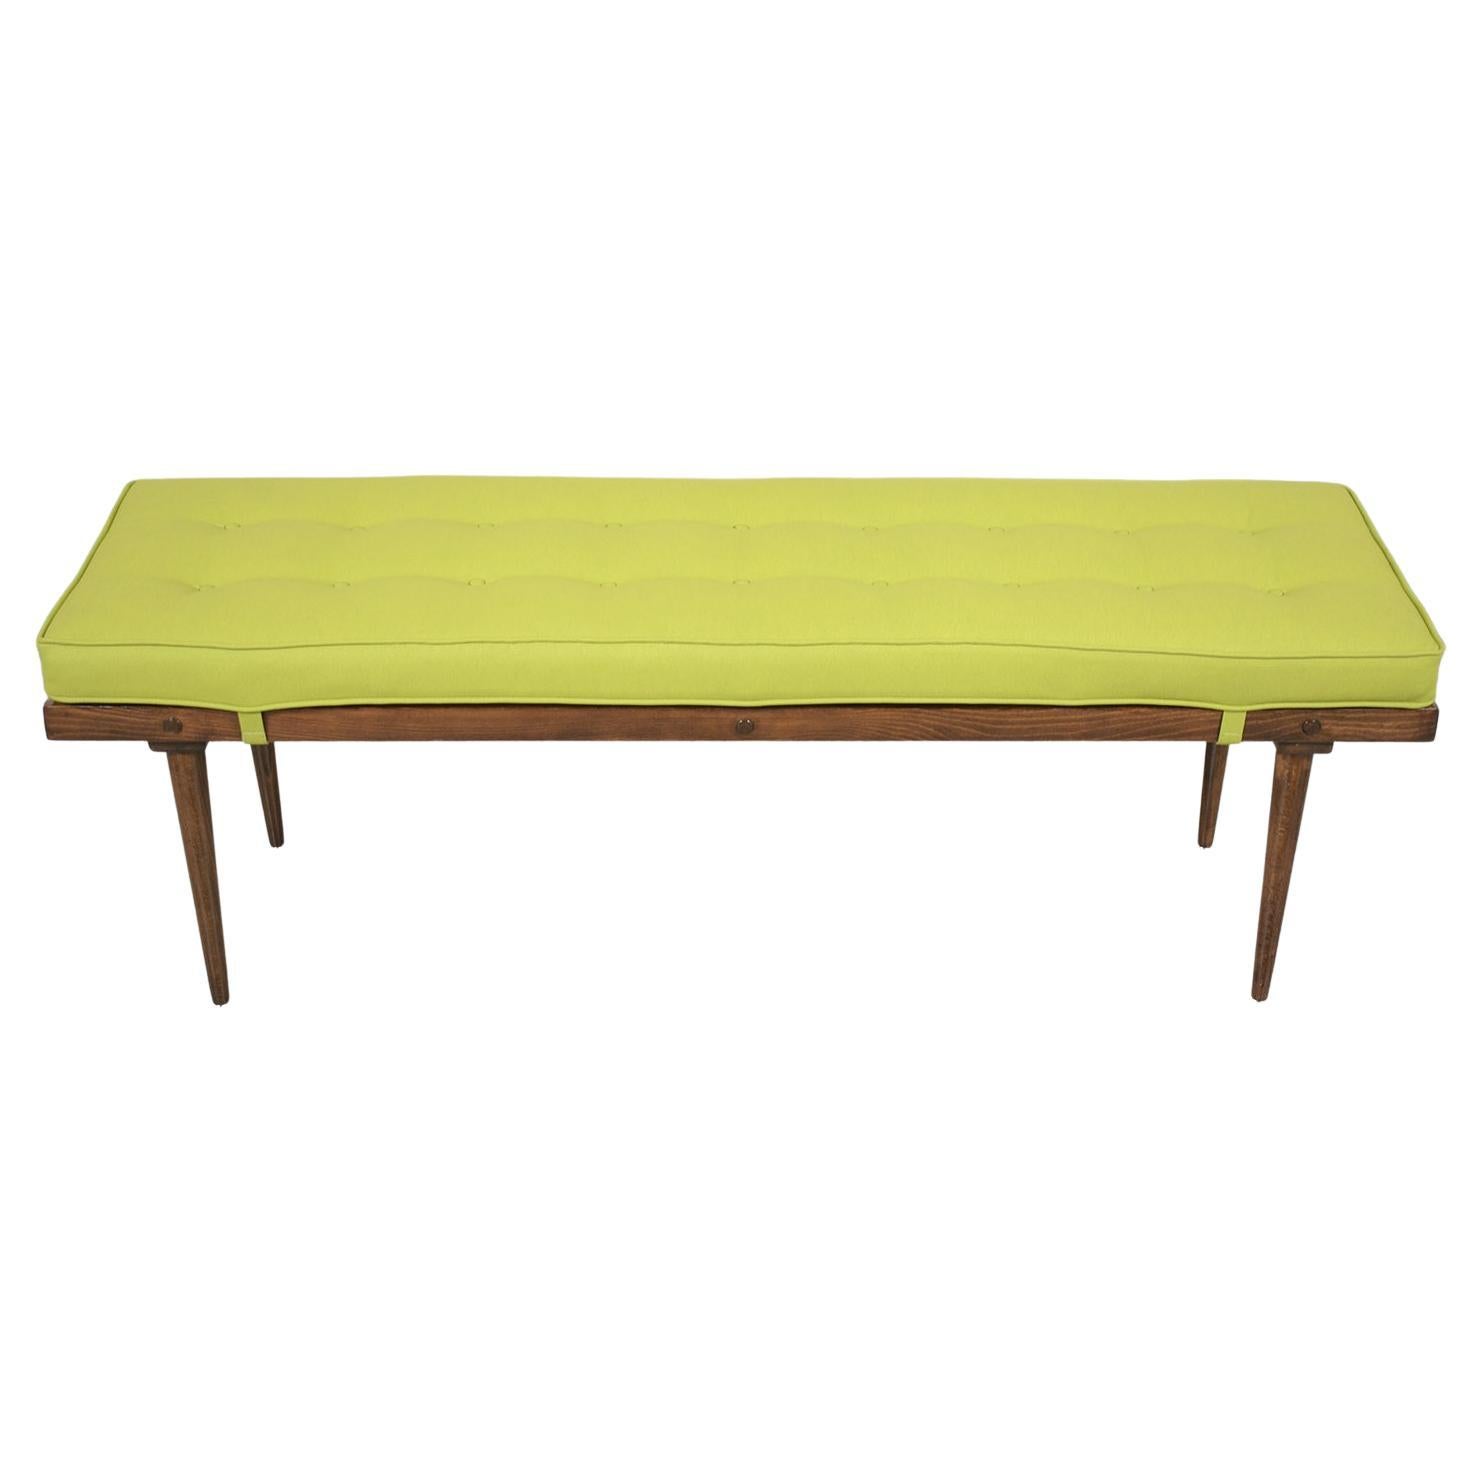 Restored Mid-Century Slatted Wood Bench with Green Vinyl Cushion